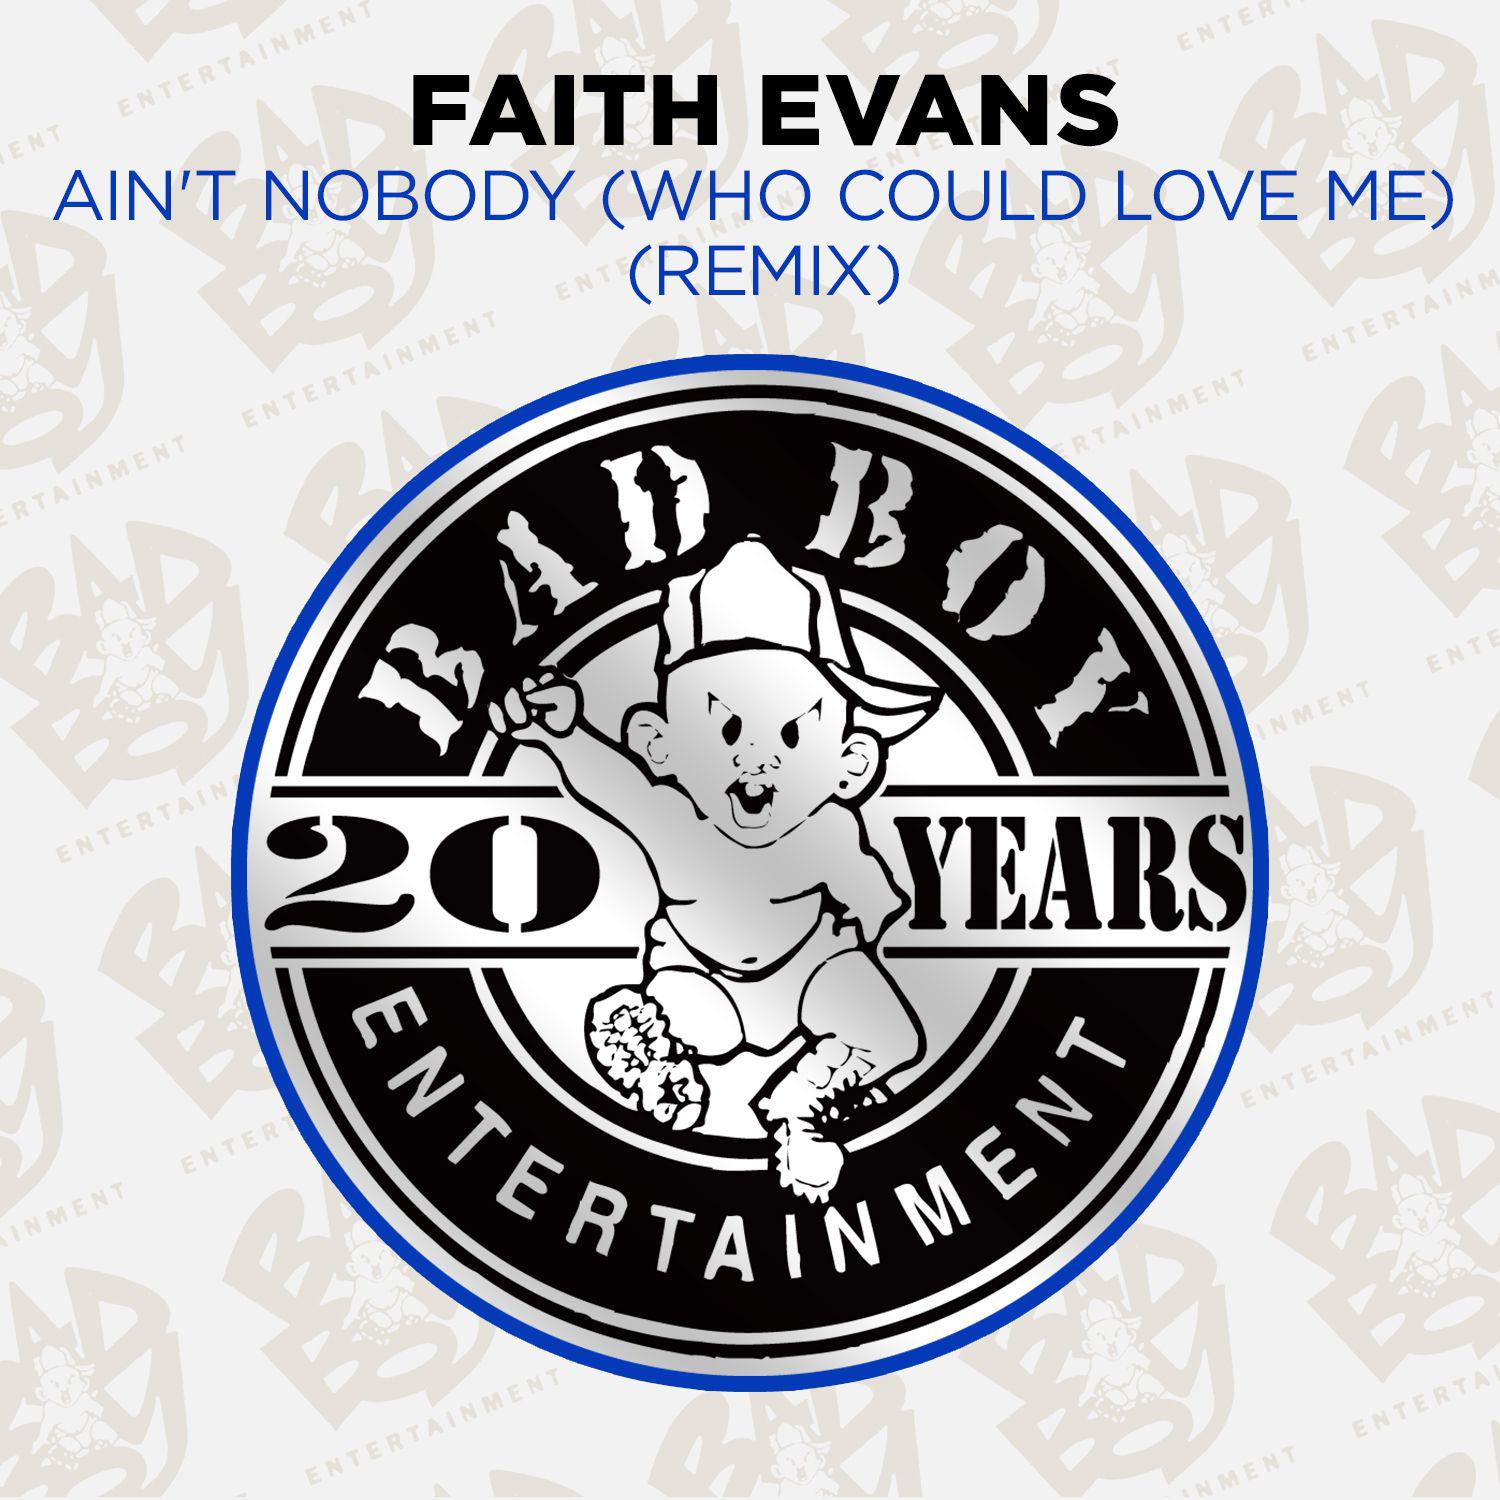 Ain't Nobody (Who Could Love Me) [Remix]